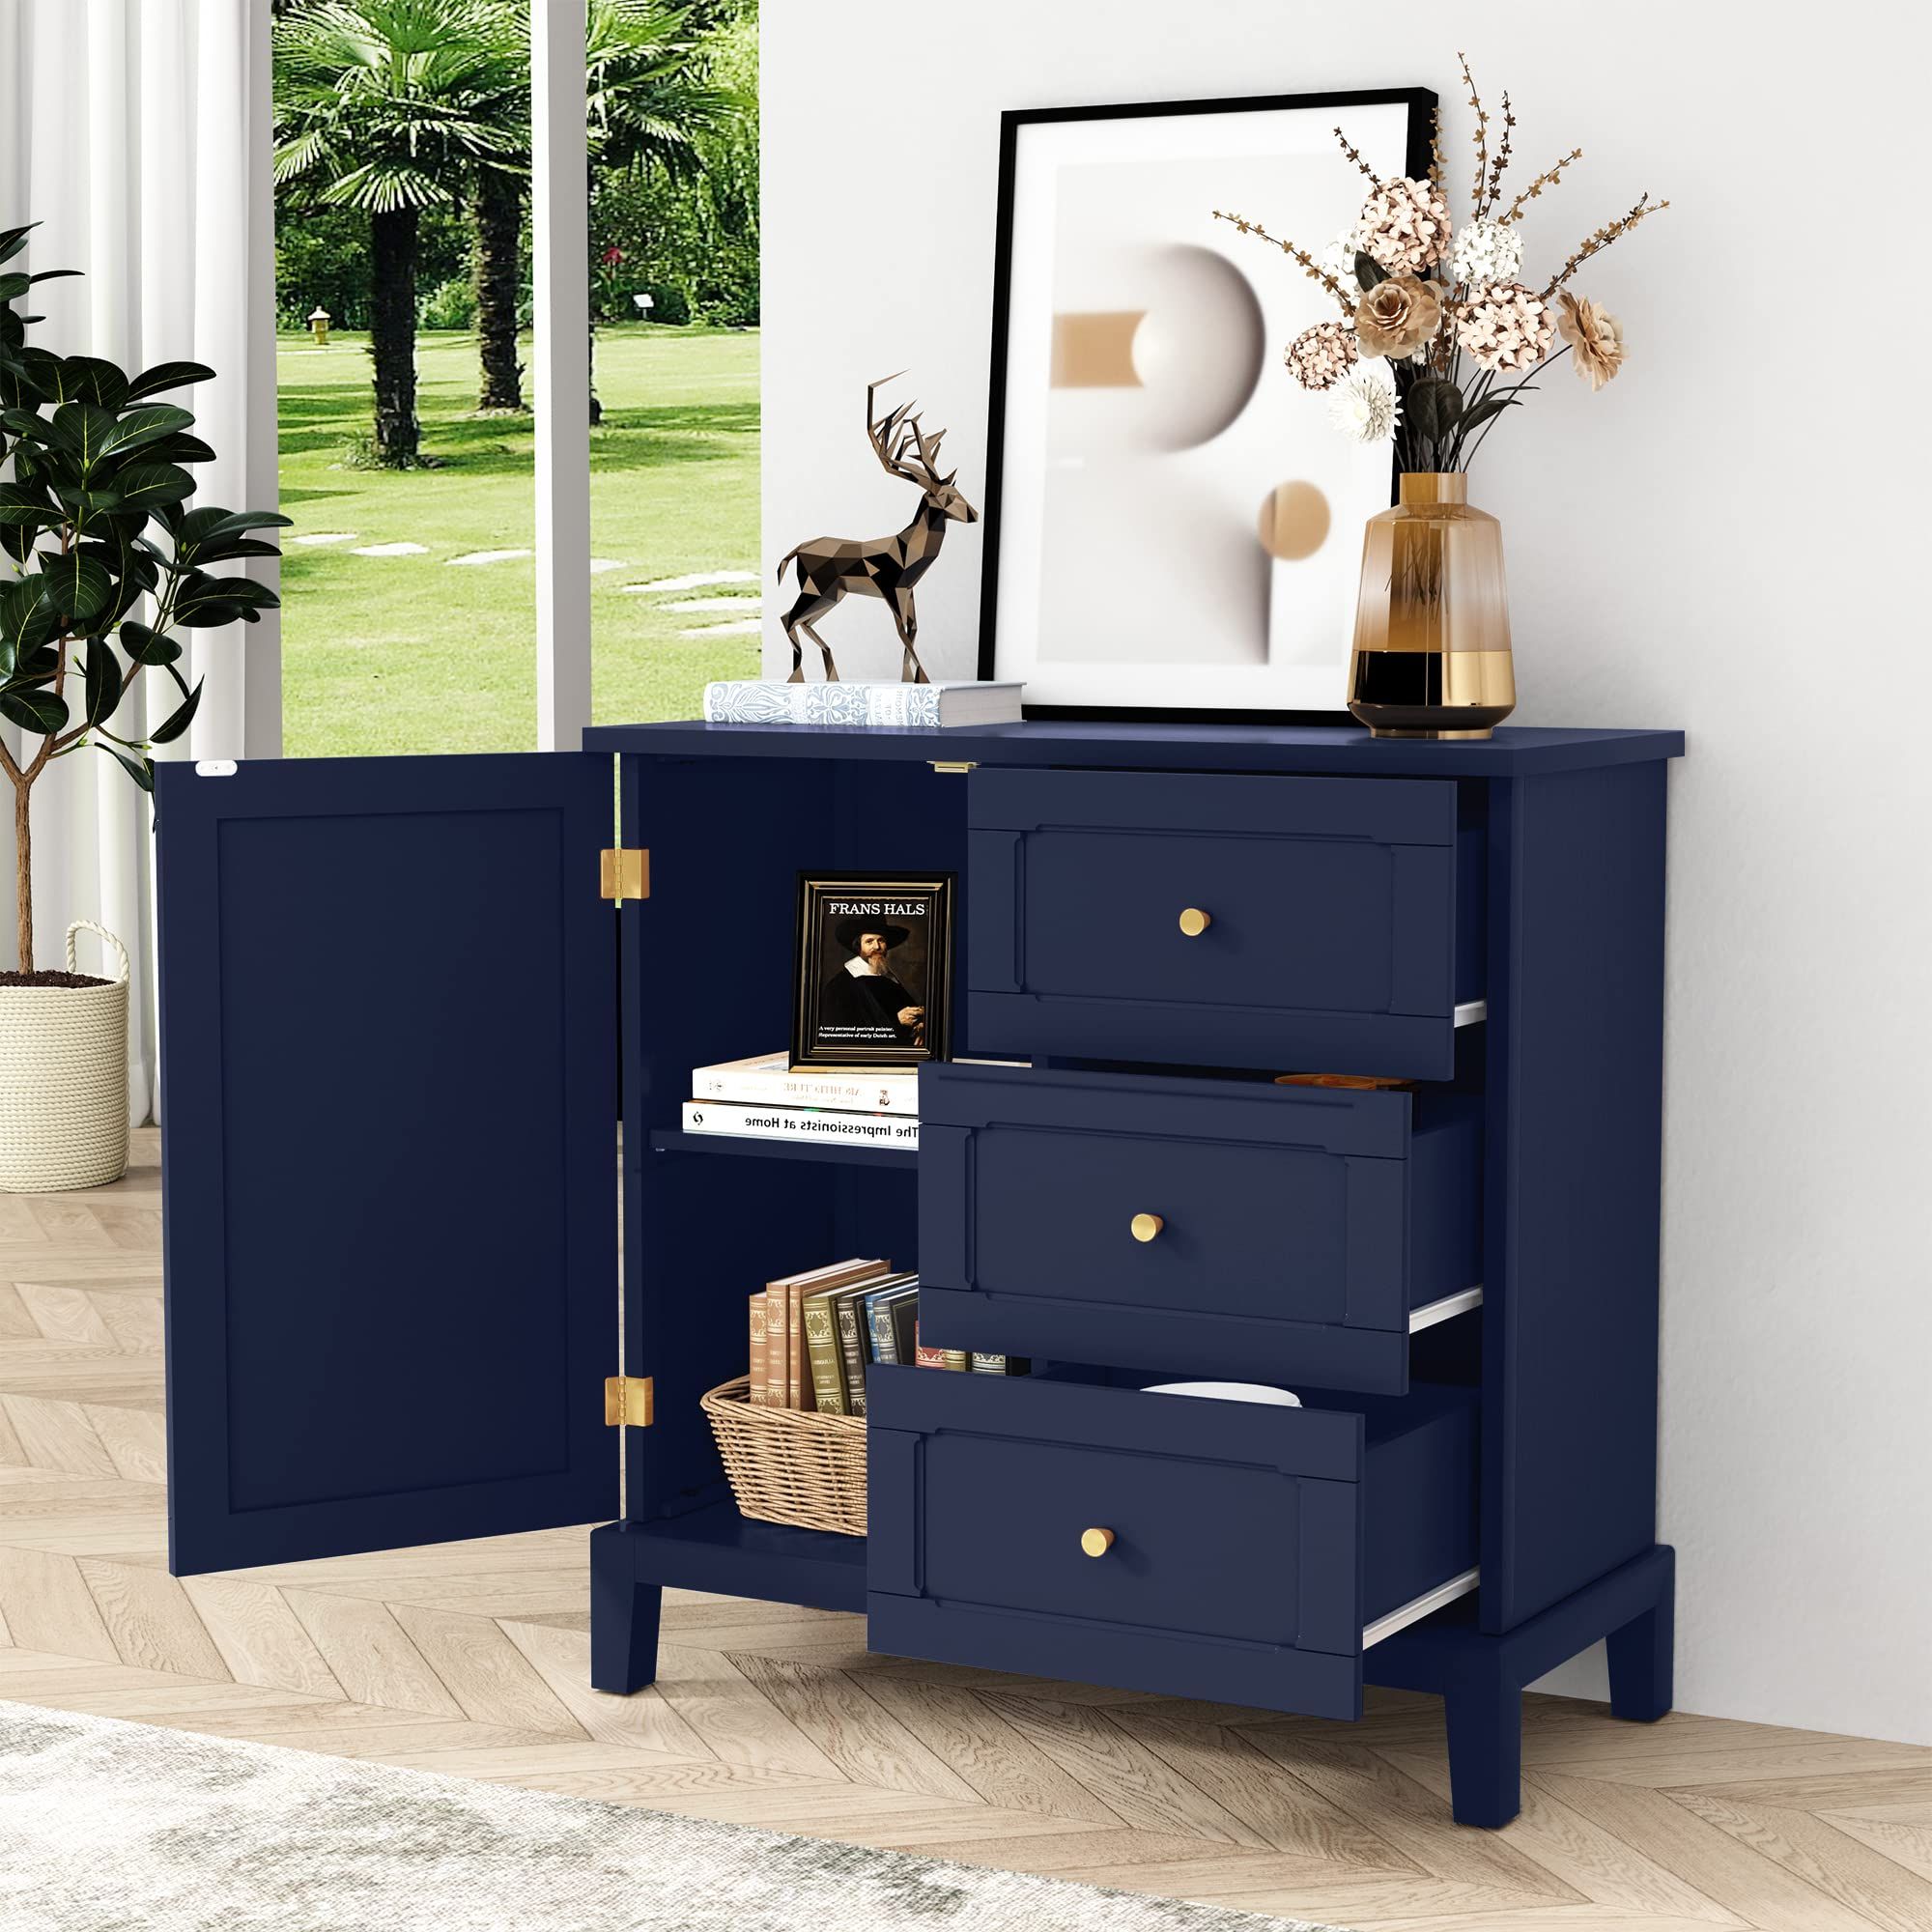 3 Drawers Sideboards Storage Cabinet In Well Liked Amazon: Hlr Accent Cabinet With 3 Drawers And Door, Wooden Storage  Cabinet With Shelves, Sideboard For Living Room, Bedroom, Entryway, Navy  Blue : Home & Kitchen (View 3 of 10)